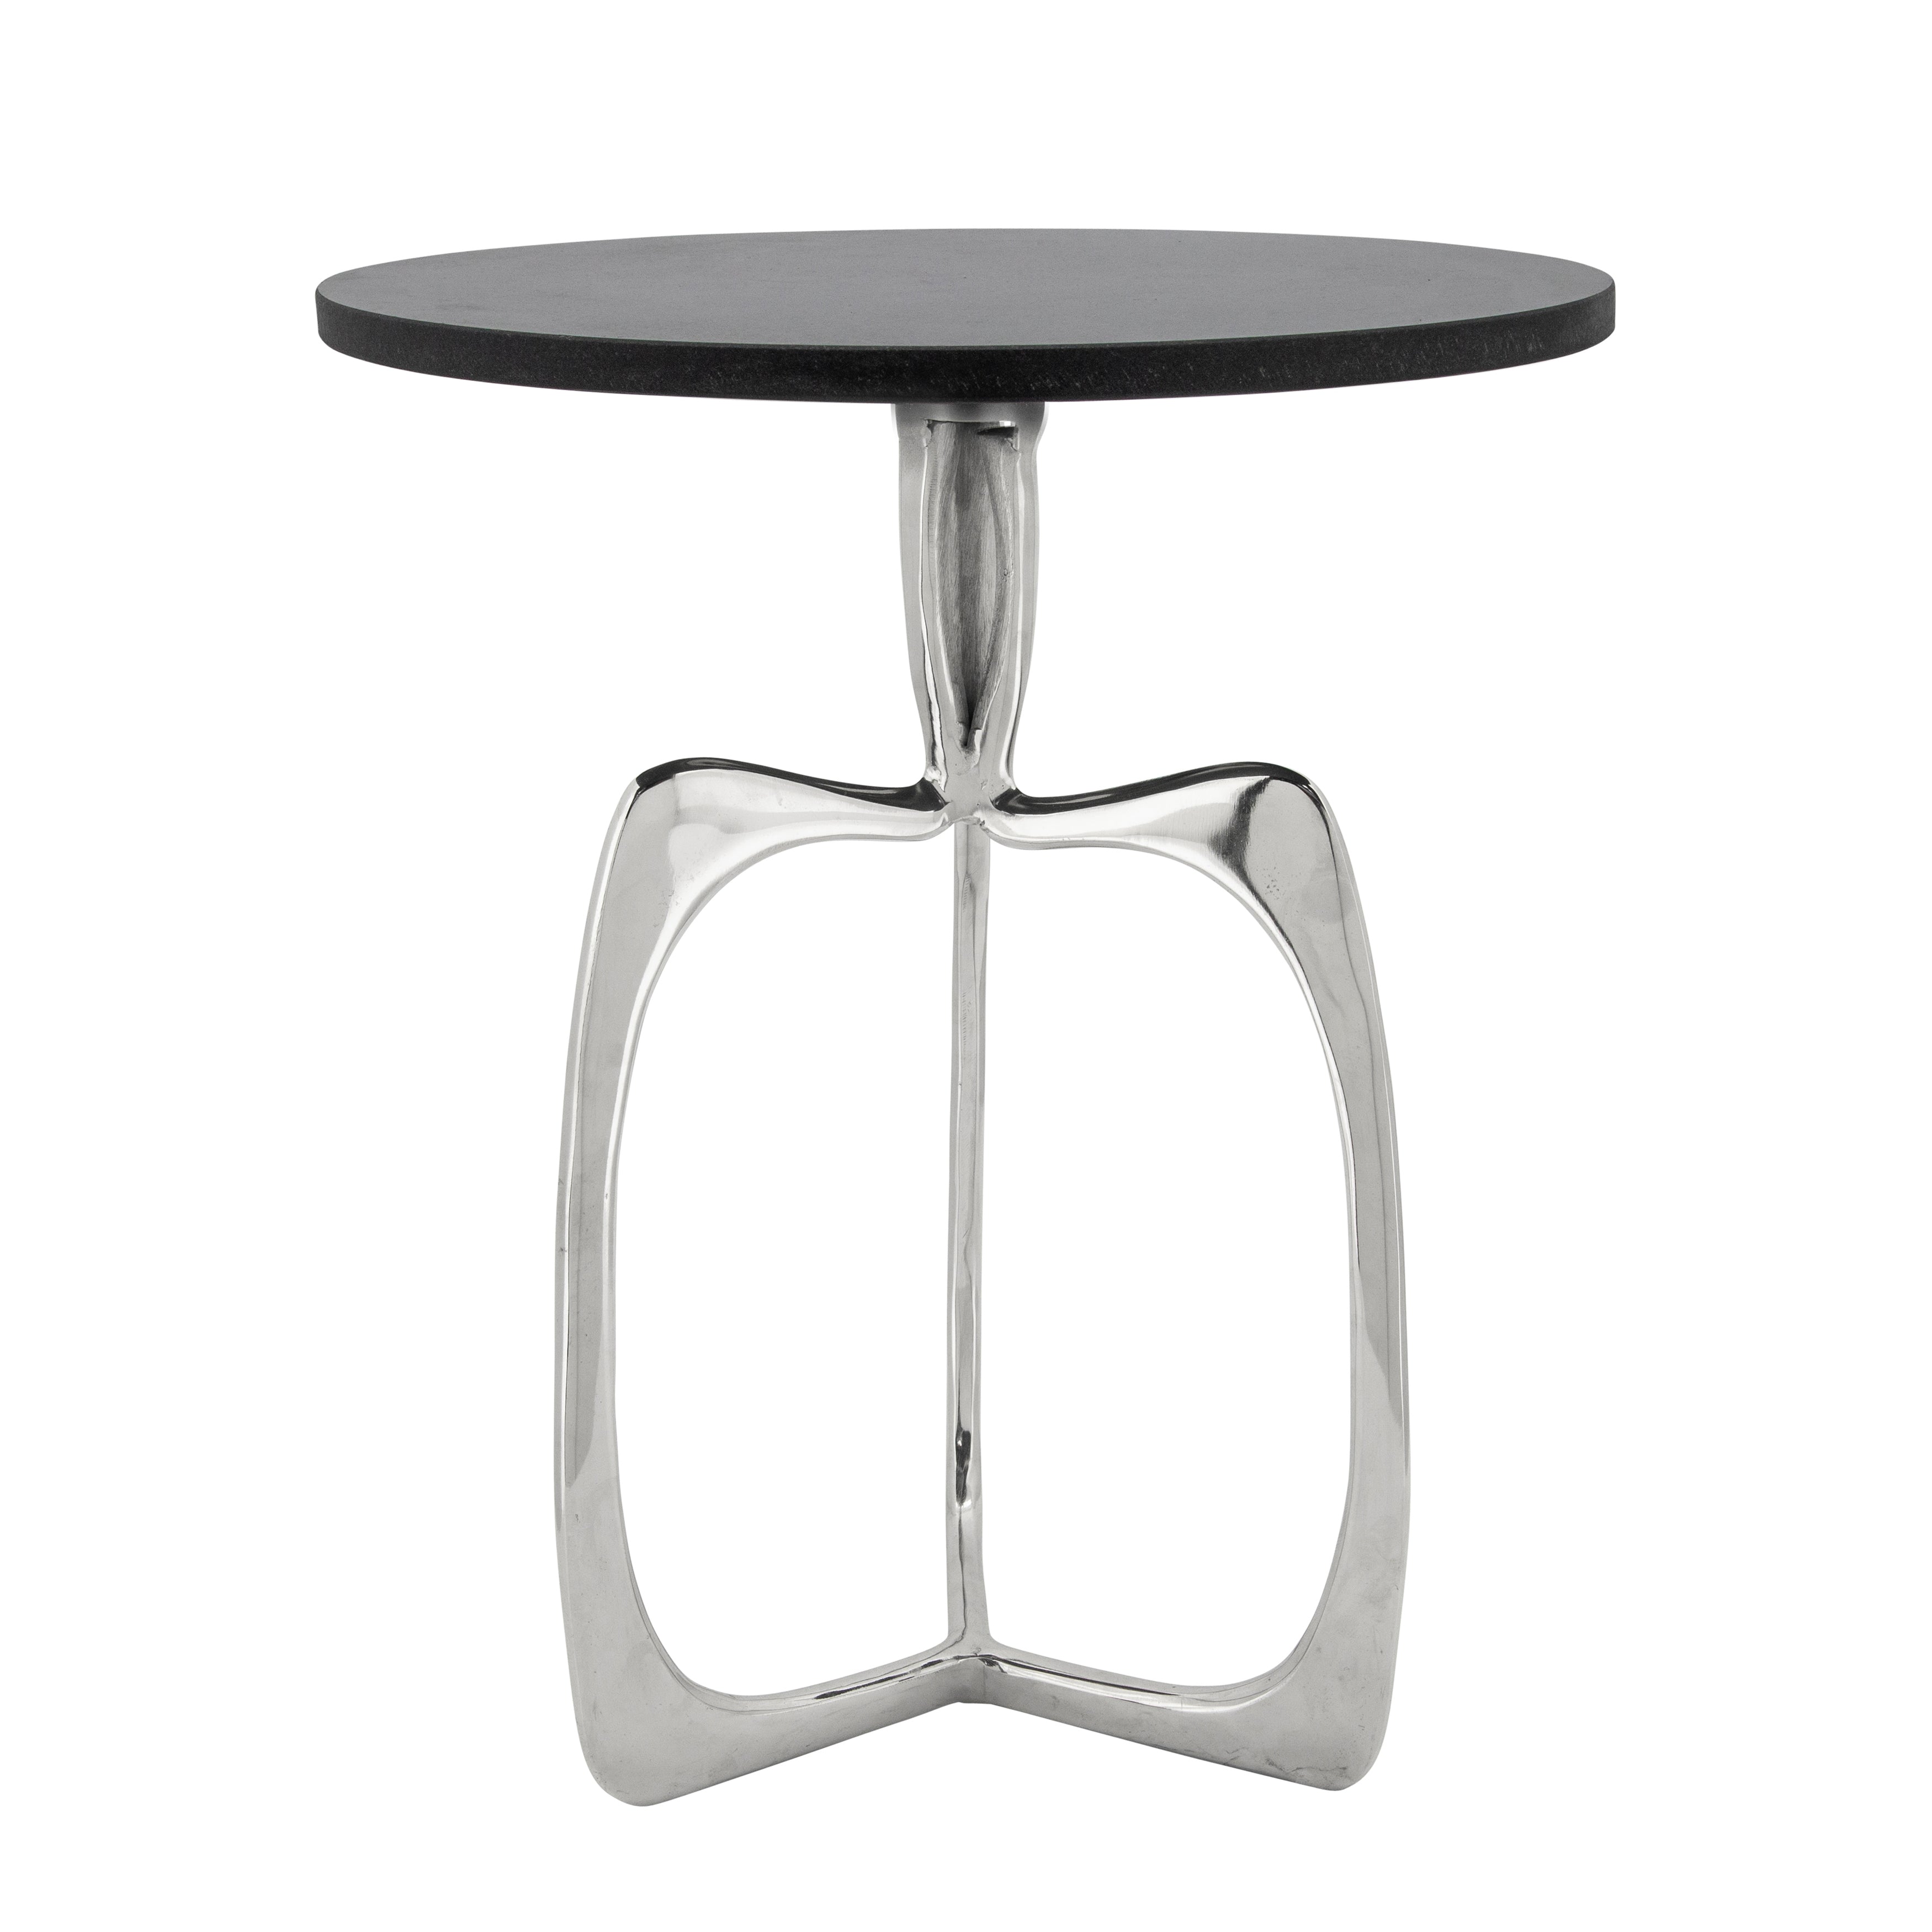 20" Accent Table W/ Black Marble, Nickel